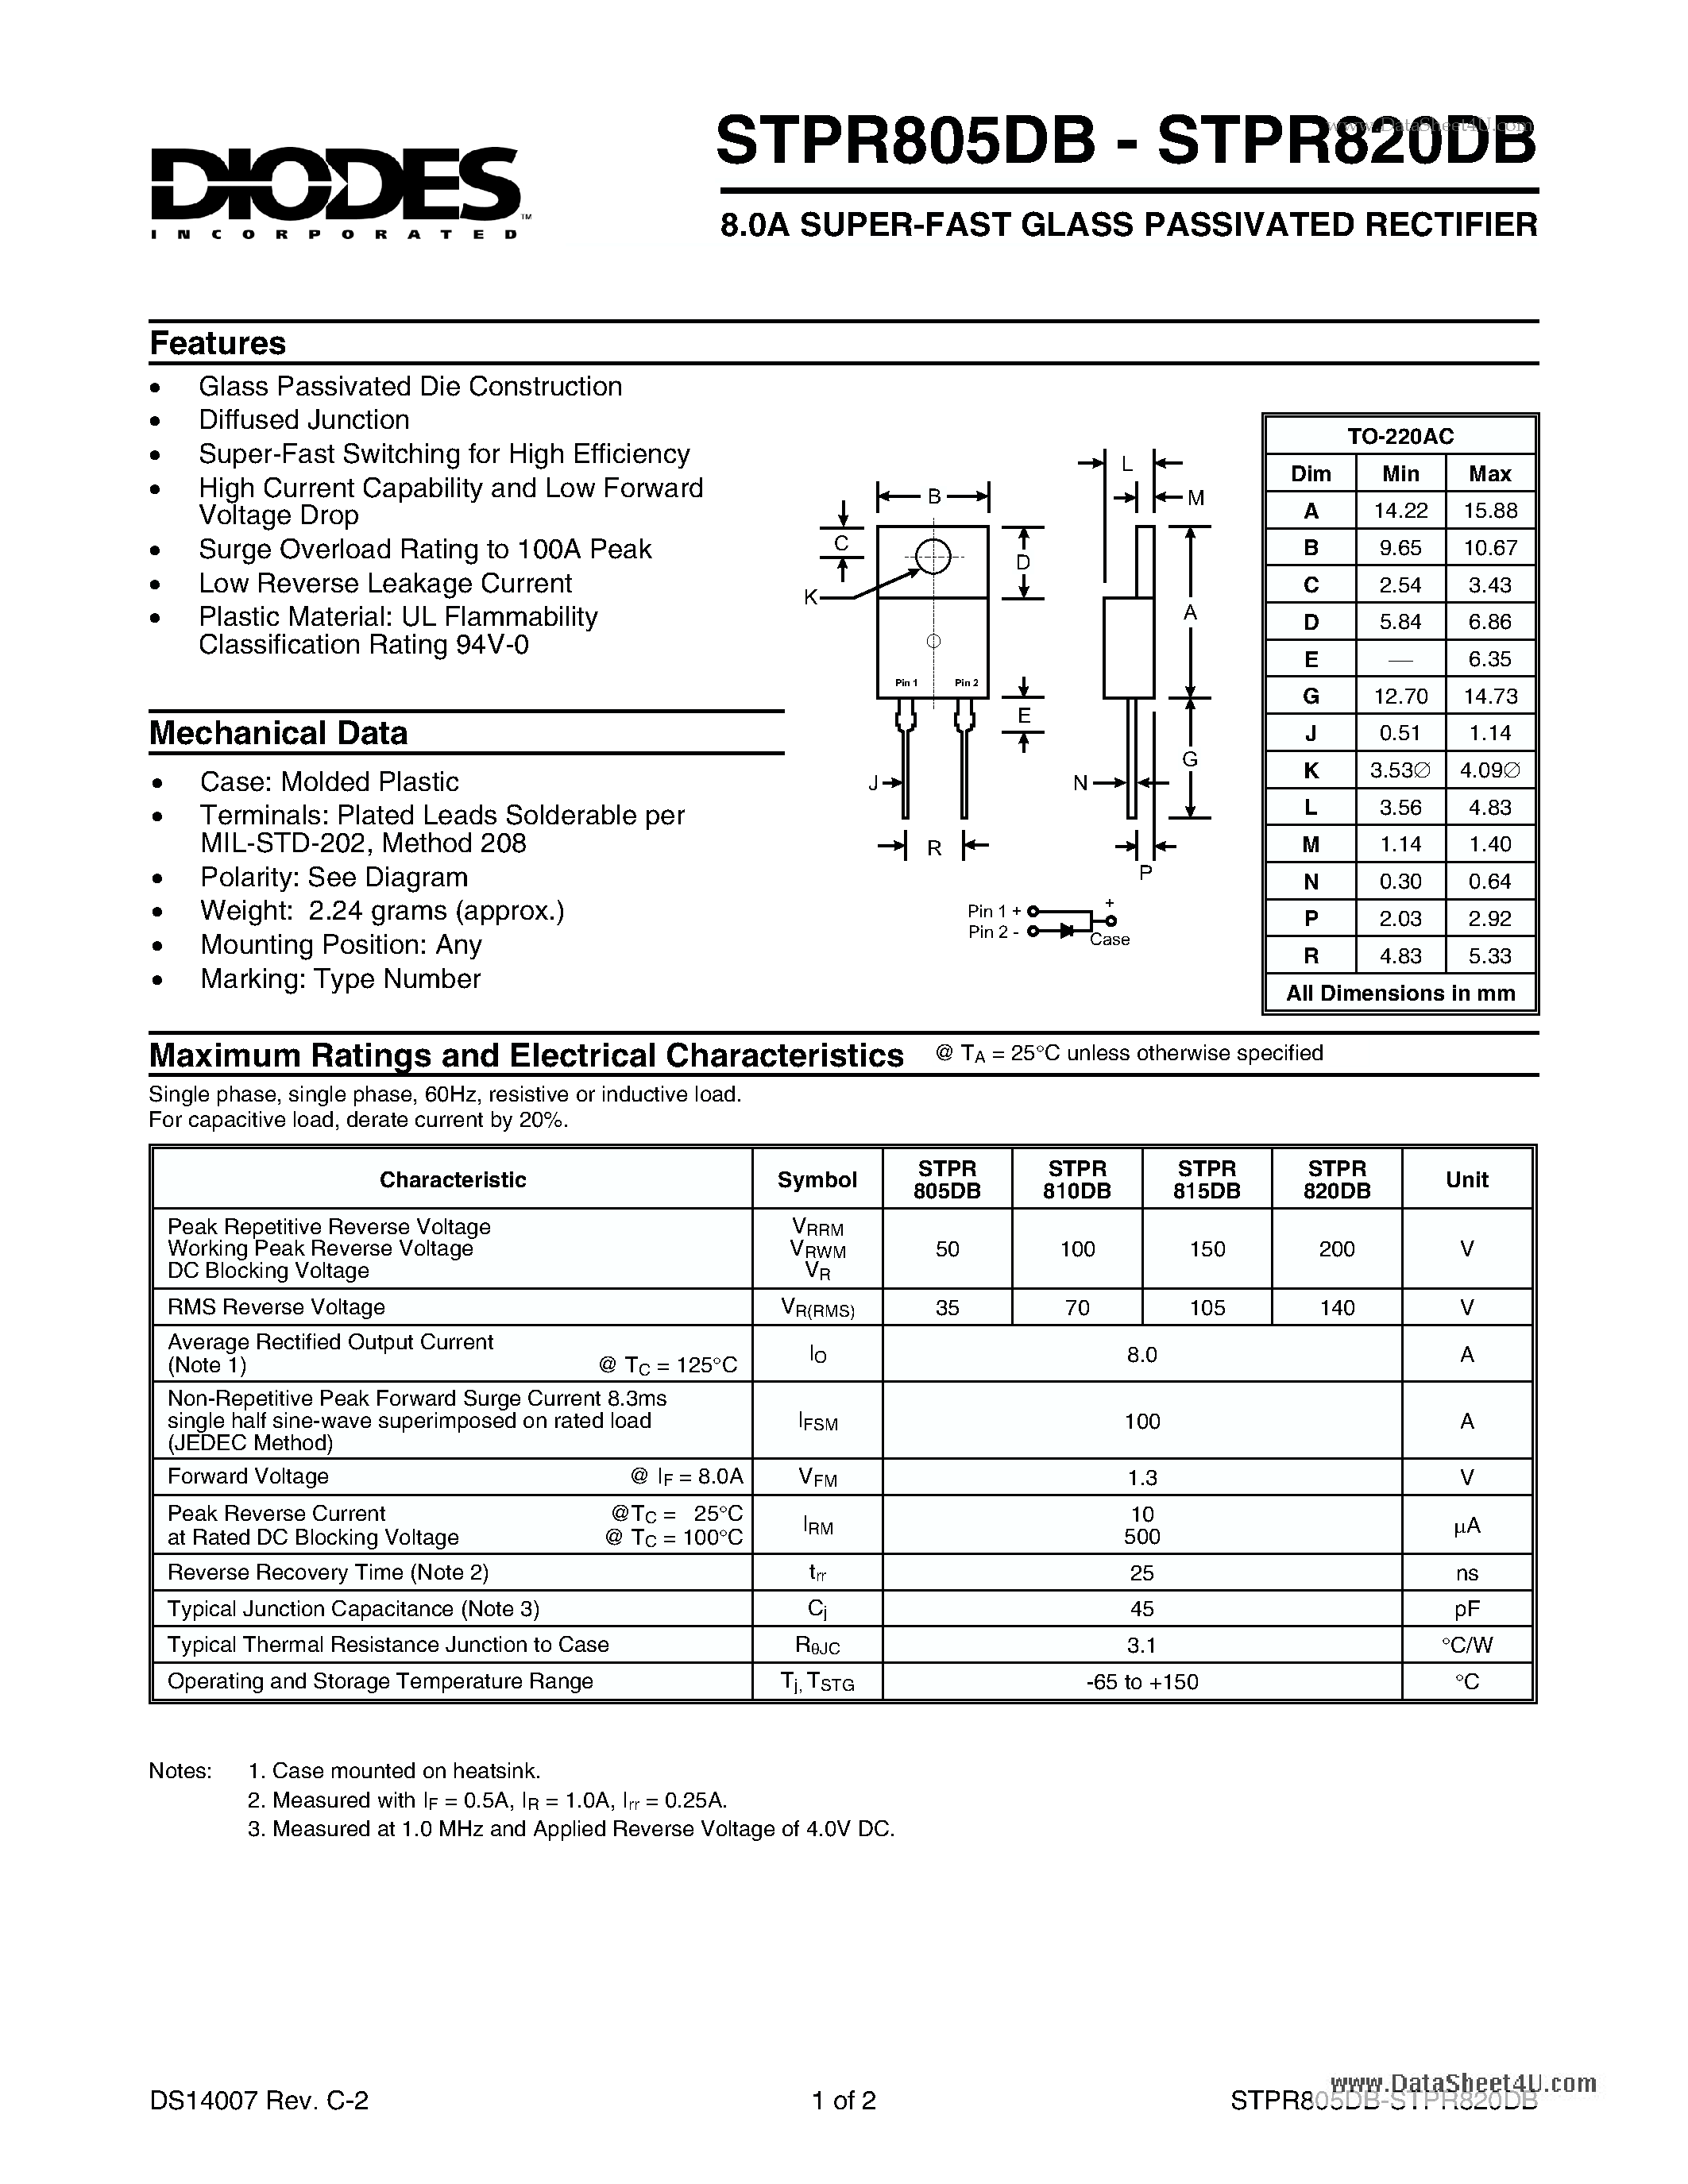 Datasheet STPR805DB - 8.0A SUPER-FAST GLASS PASSIVATED RECTIFIER page 1